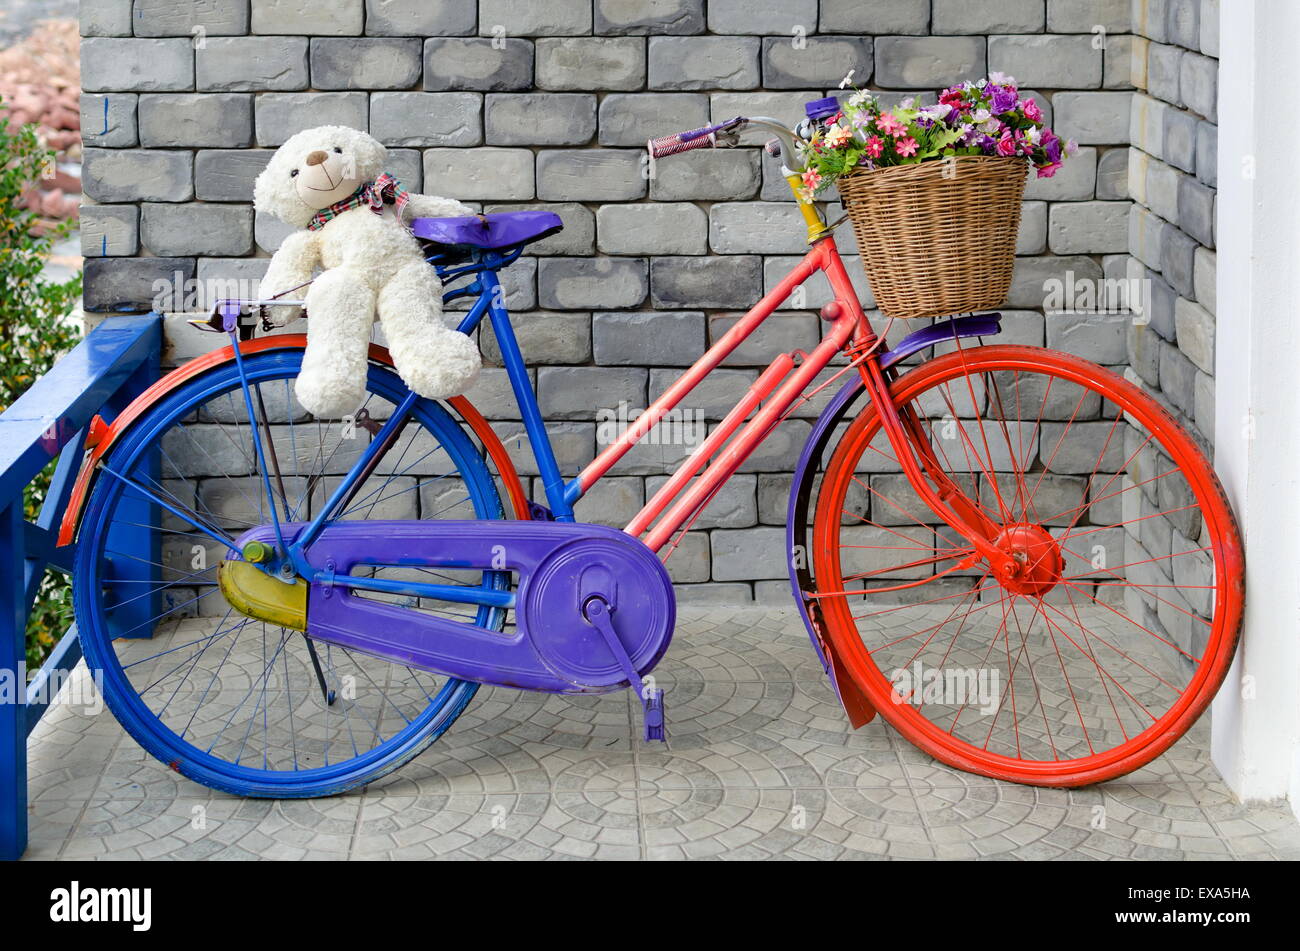 Colorful old bike was decorated on the road. Stock Photo